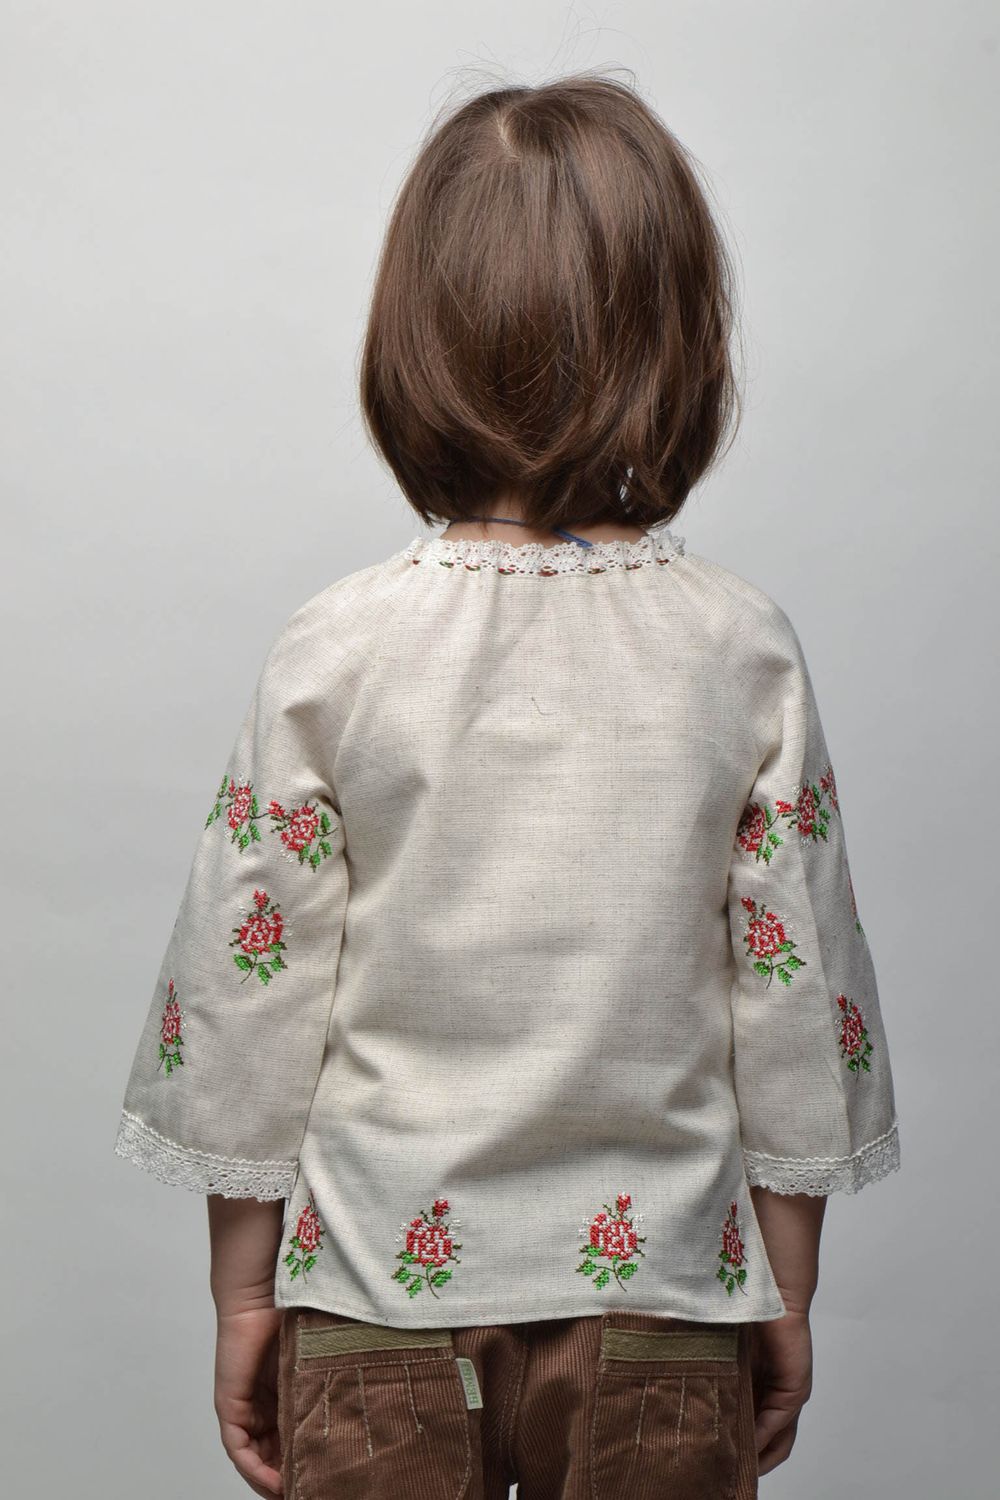 Embroidered shirt for 5-7 years old children photo 4